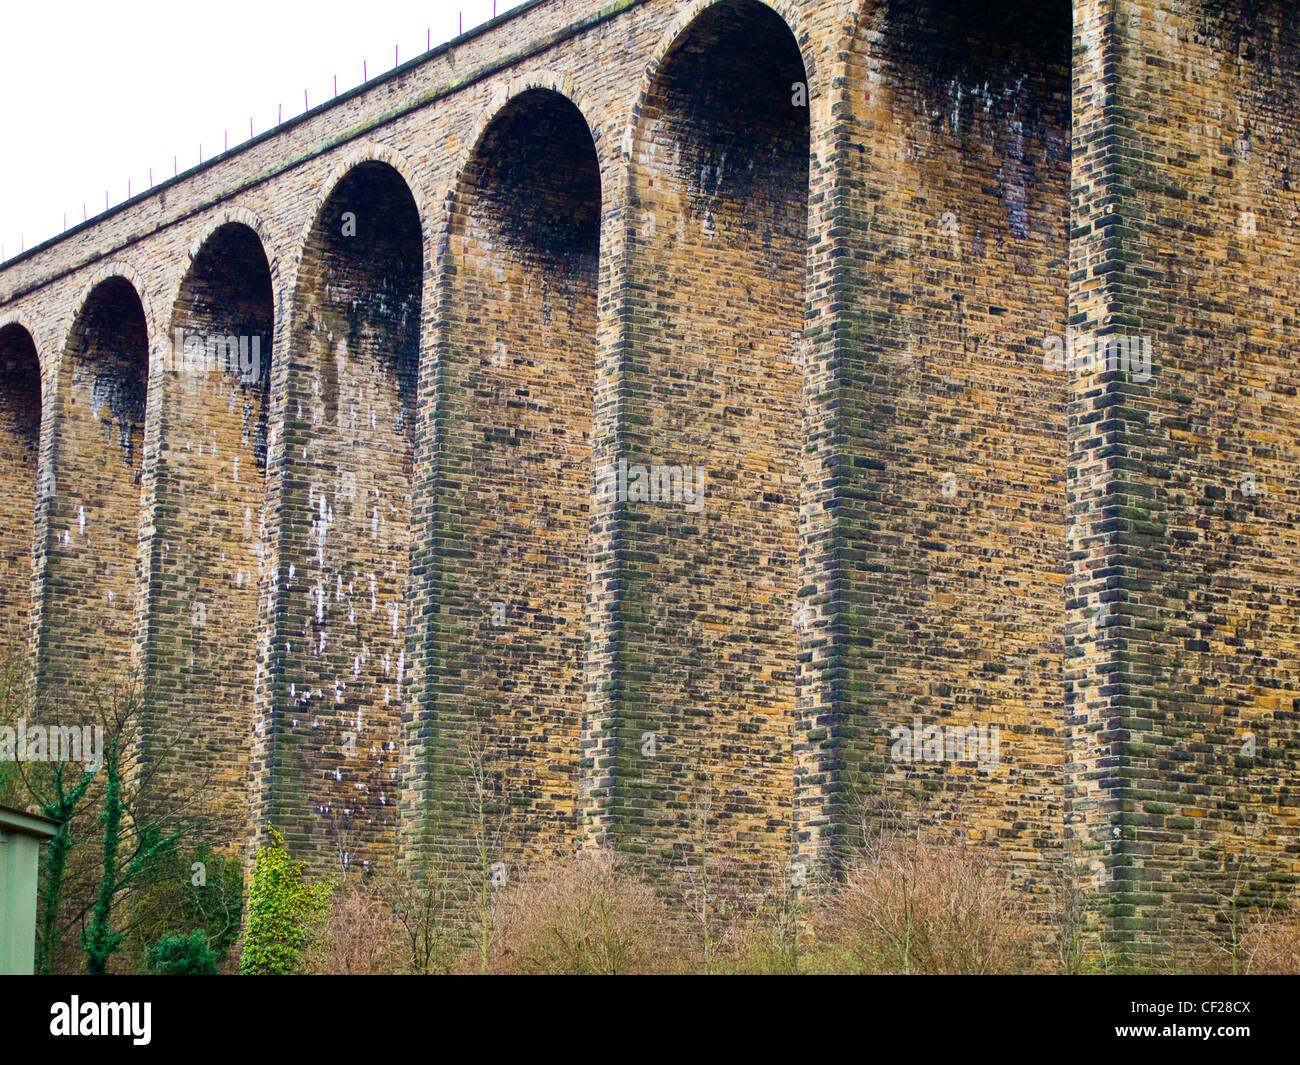 A viaduct in near Huddersfield in Yorkshire, England Stock Photo